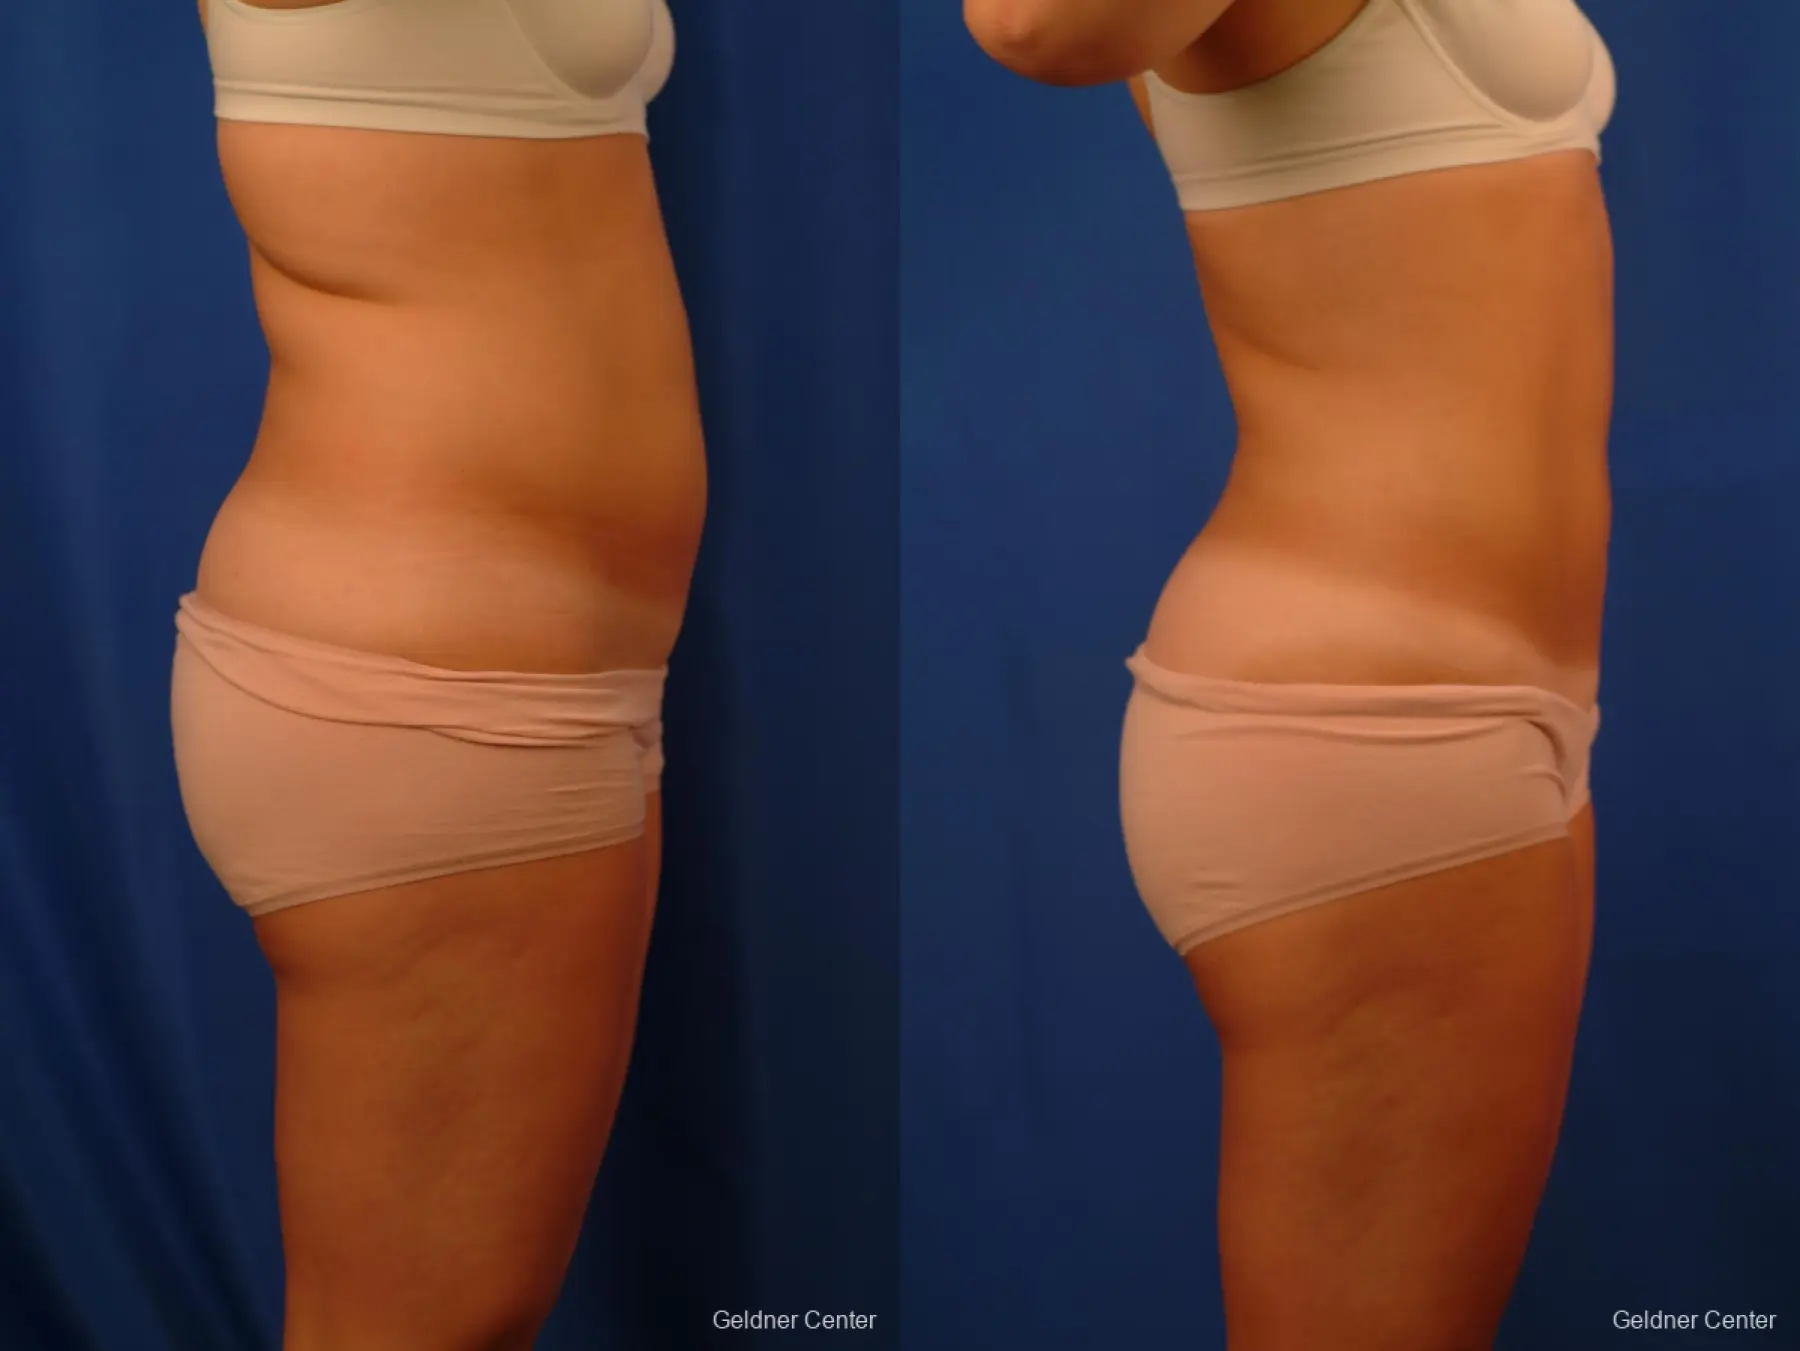 Vaser lipo patient 2514 before and after photos - Before and After 3